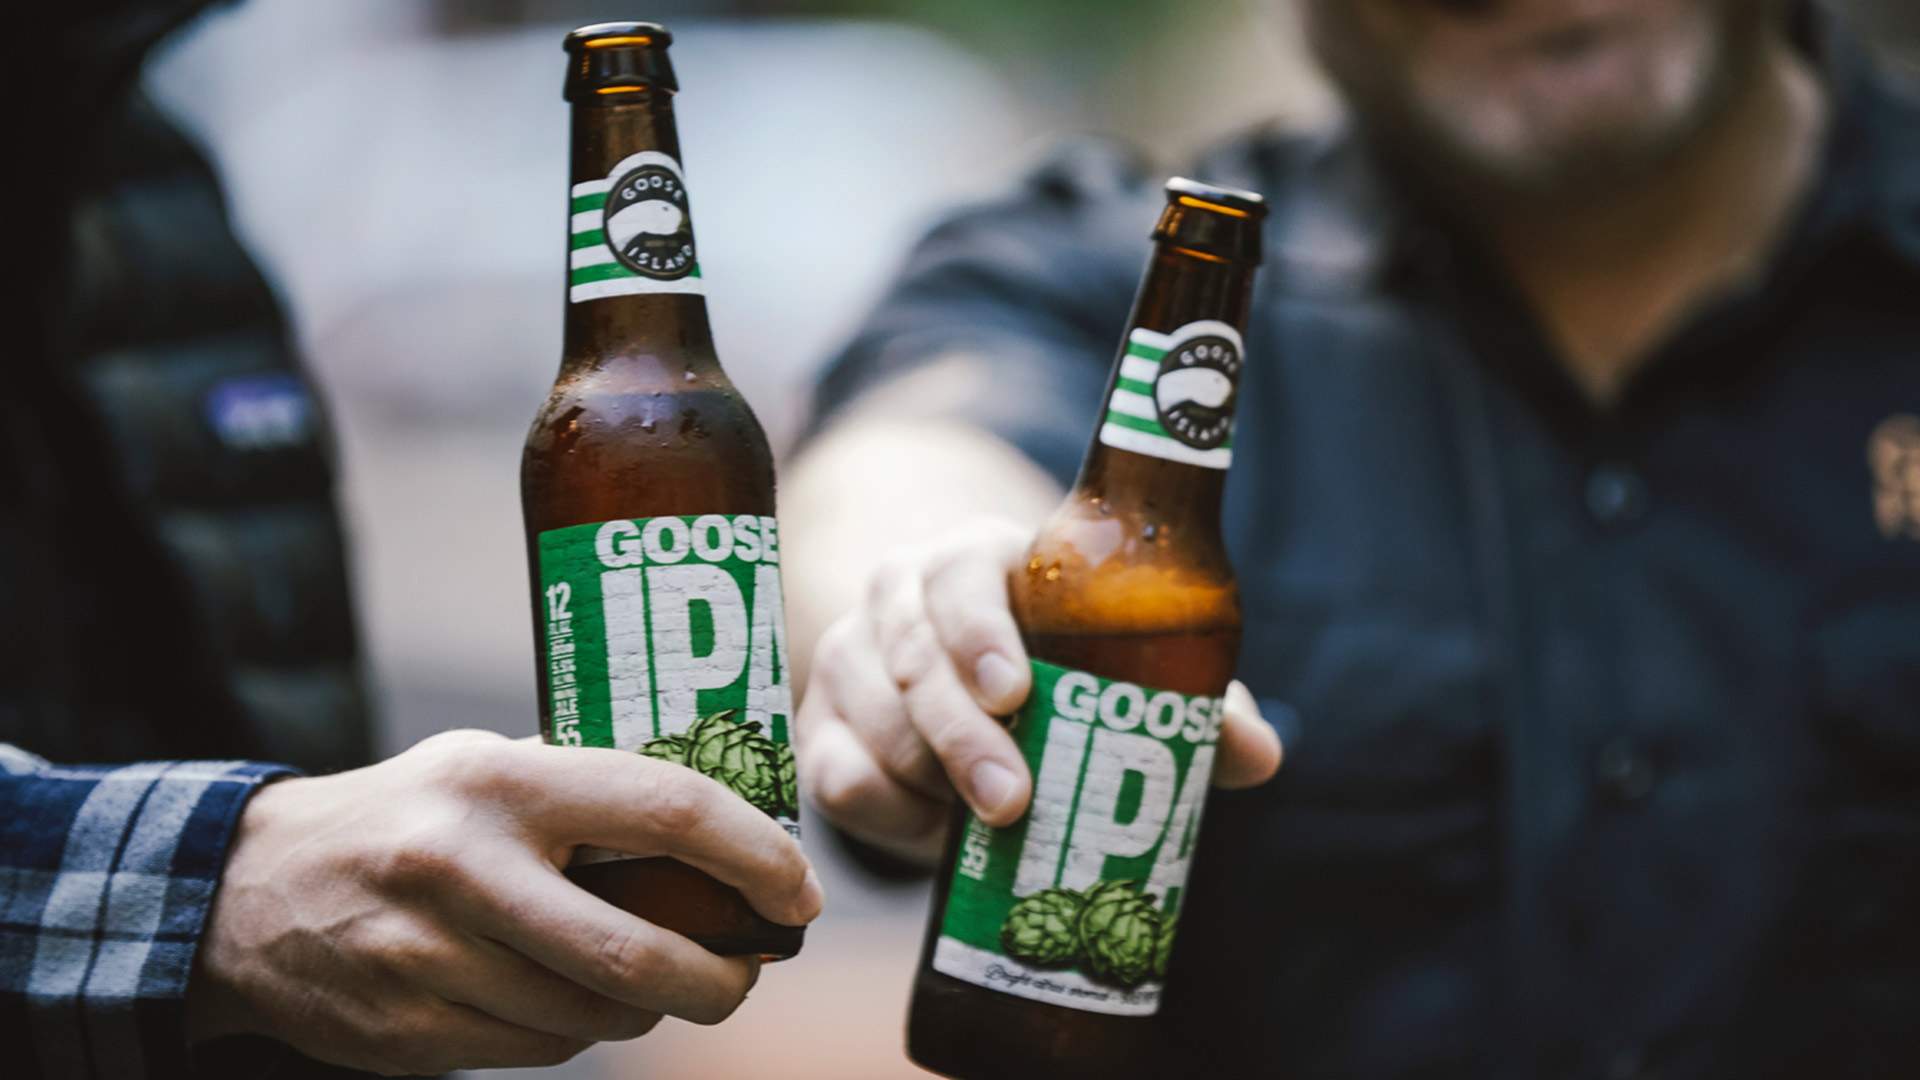 We're Giving Away Double Passes to Goose Island's Chicago Session